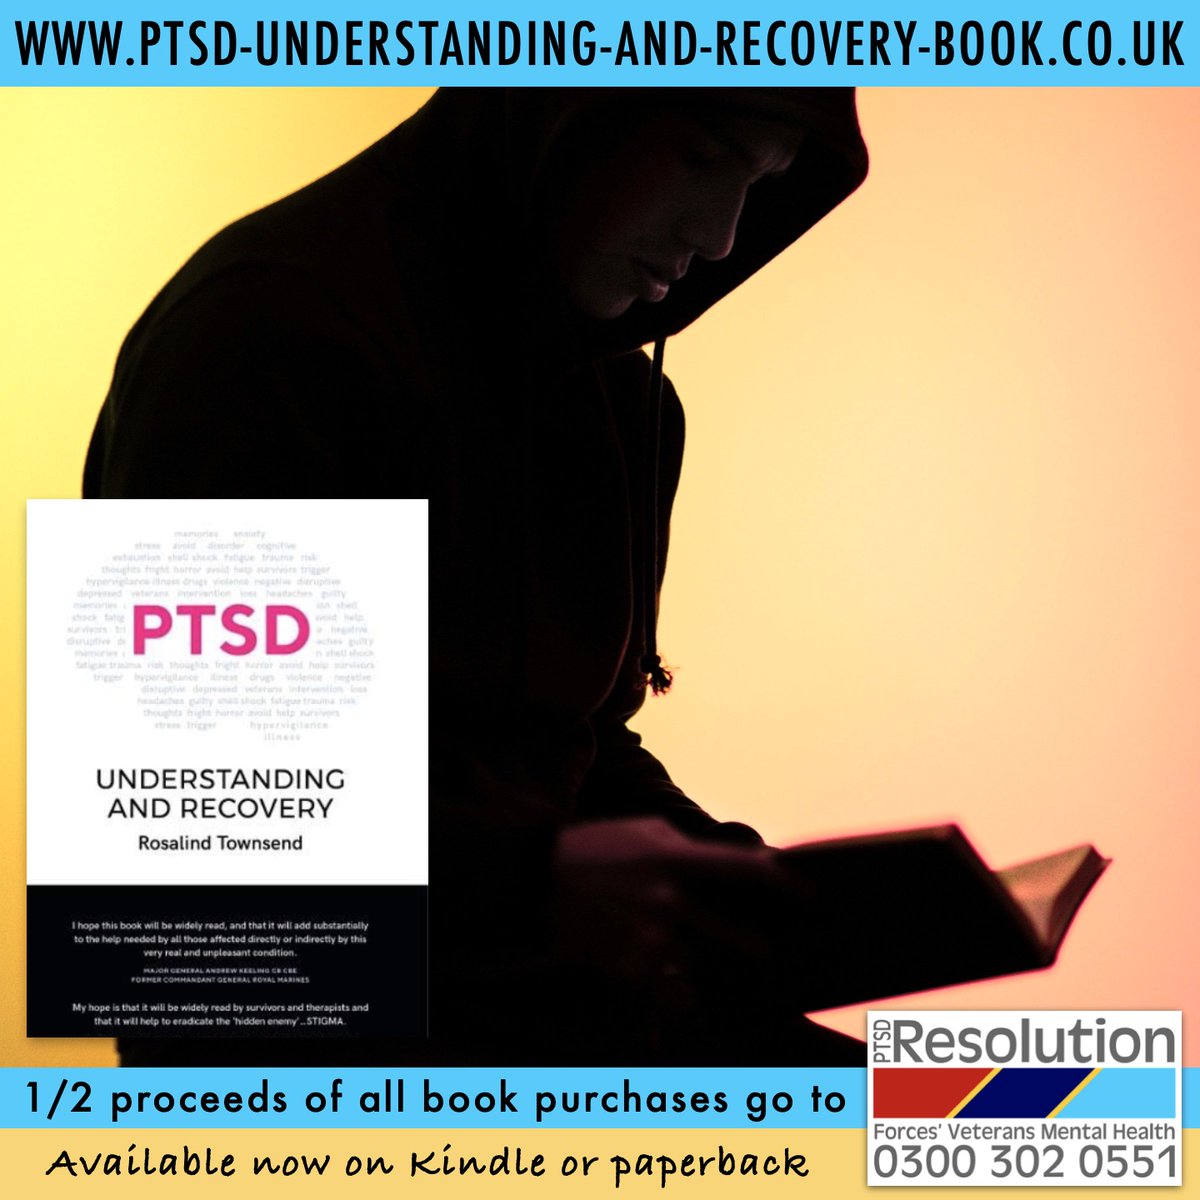 This excellent rundown on Post Traumatic Stress is straightforward, easy to understand - & it doesn’t take long to get through ✅✅✅ Plus - 1/2 the proceeds of all book purchases go to #PTSDResolution so we can continue providing our free therapy 👍 ➡️ …understanding-and-recovery-book.co.uk